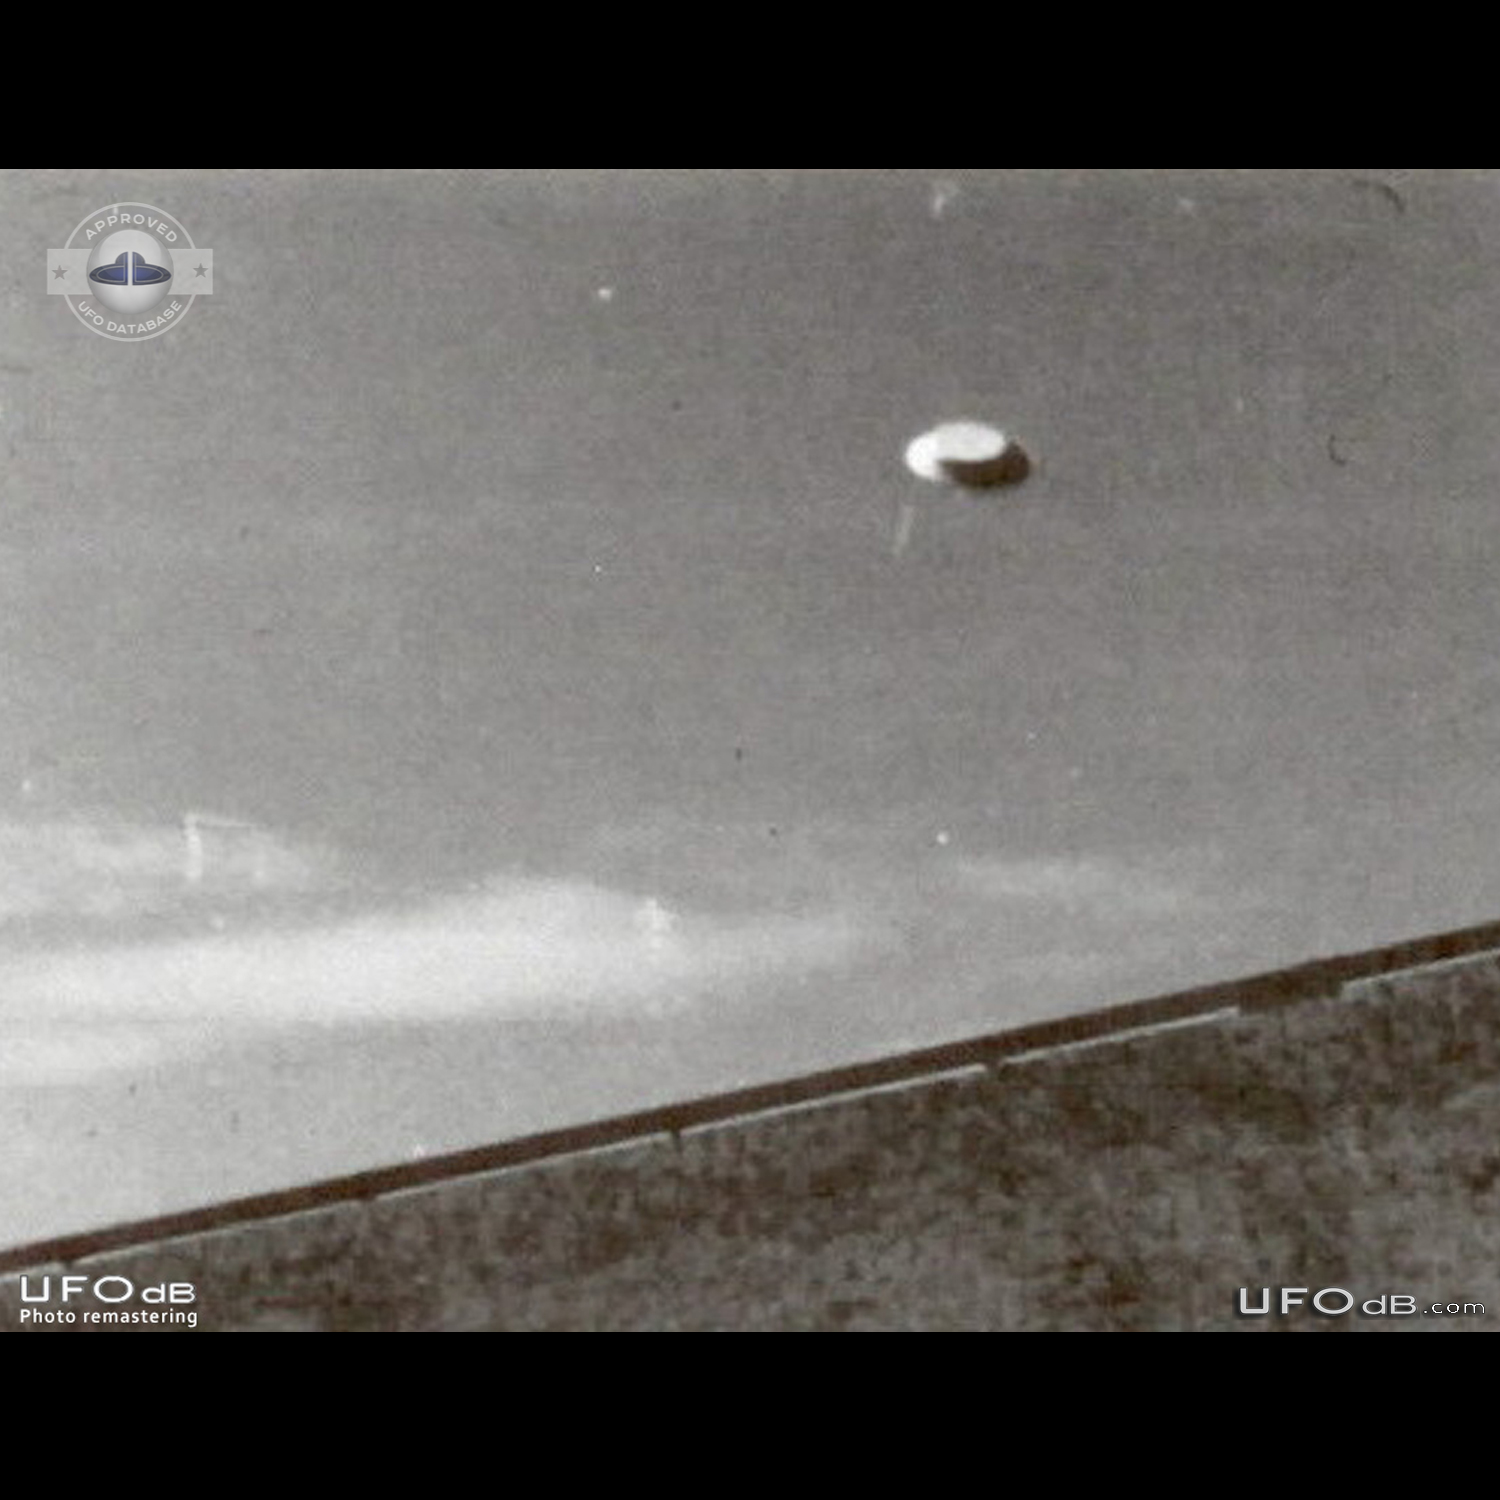 Hat shaped UFO picture taken in the village of Belotic Macva Serbia in UFO Picture #832-1